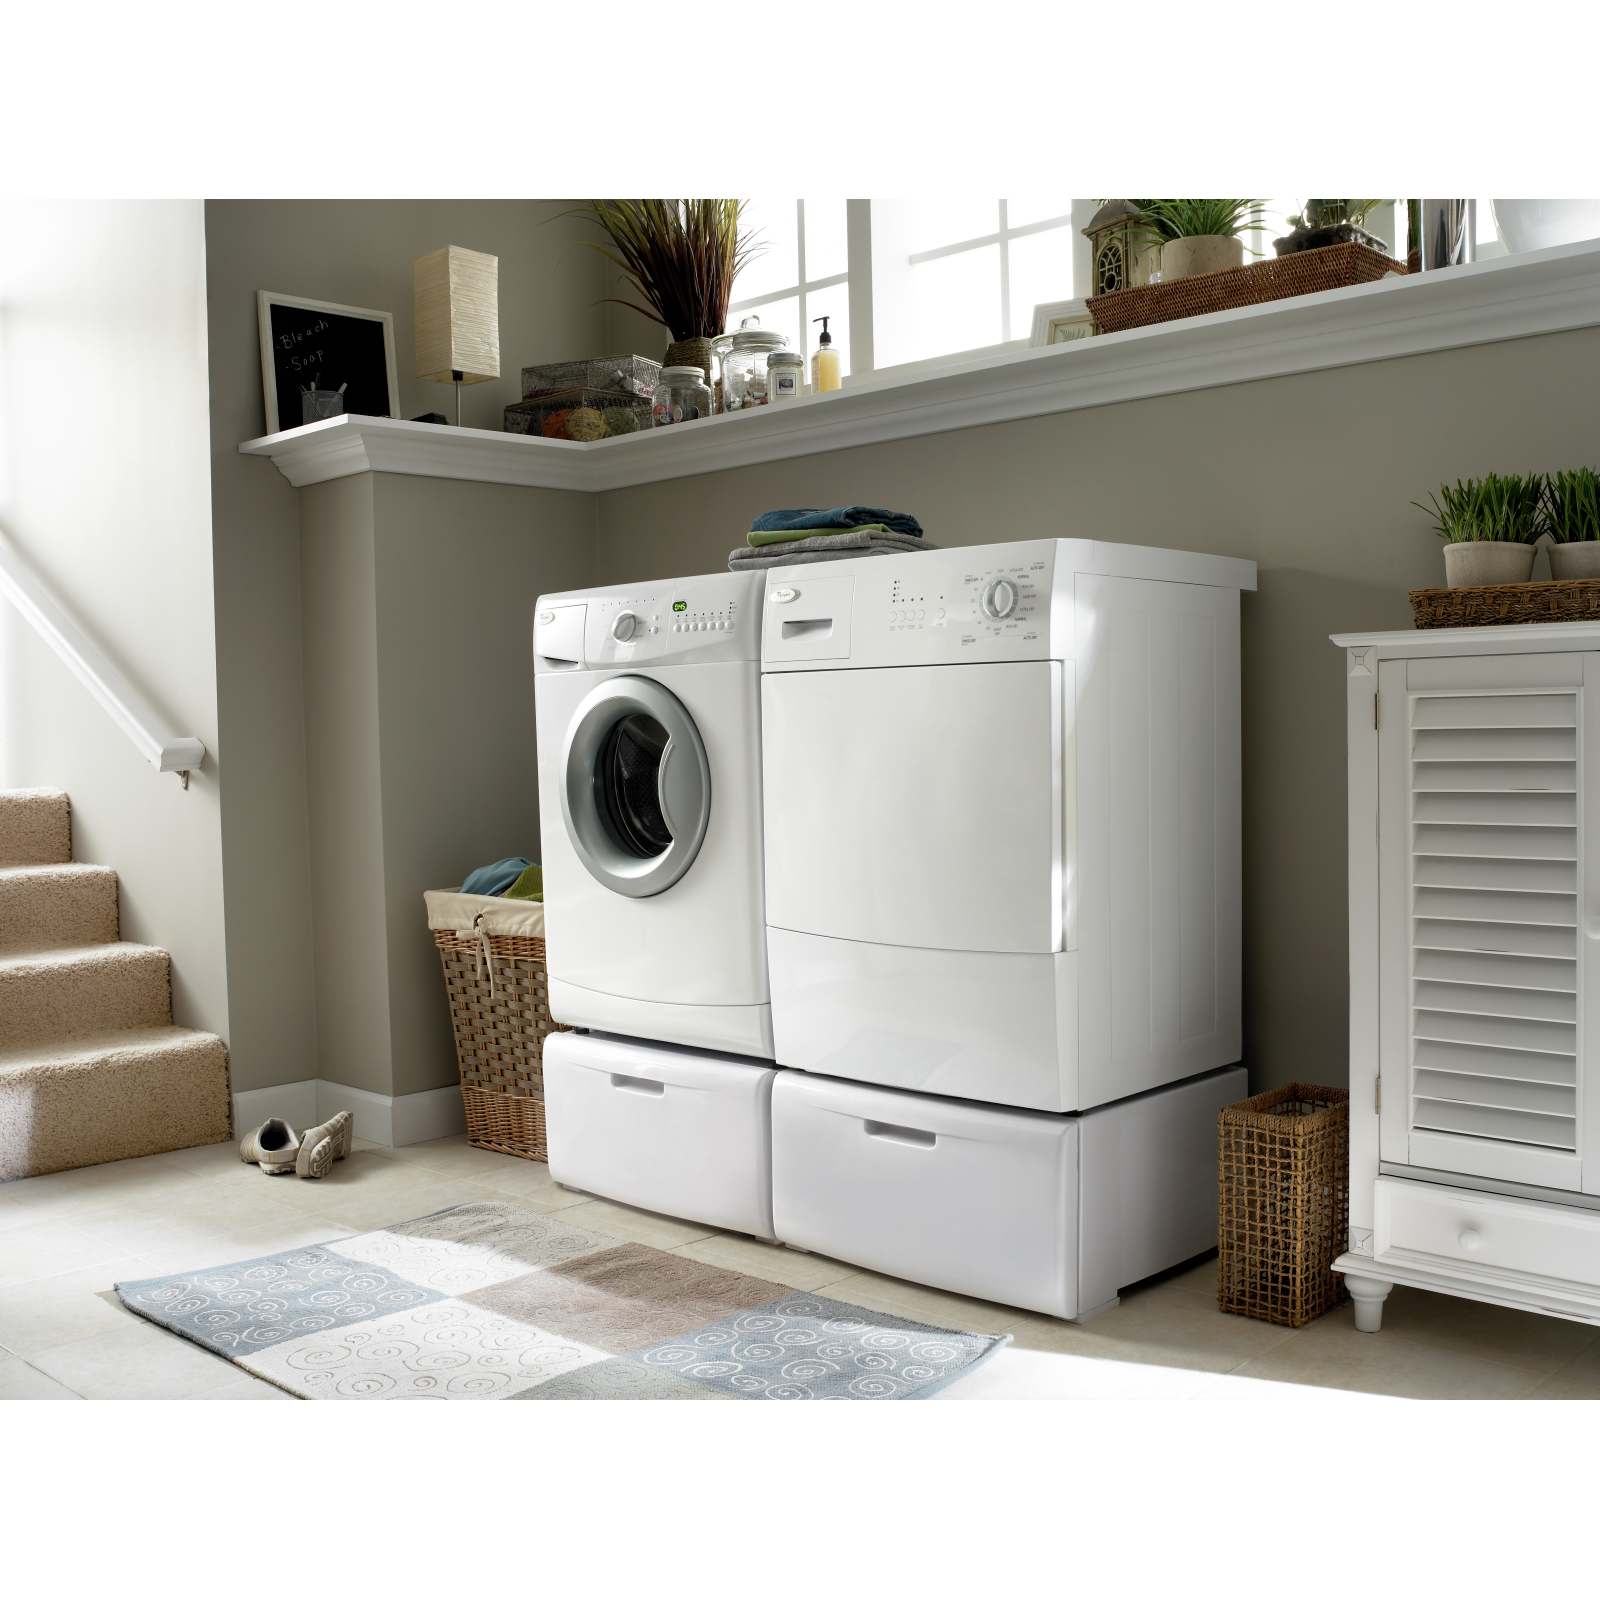 Whirlpool - 2.3 cu. Ft  Front Load Washer in White - WFC7500VW